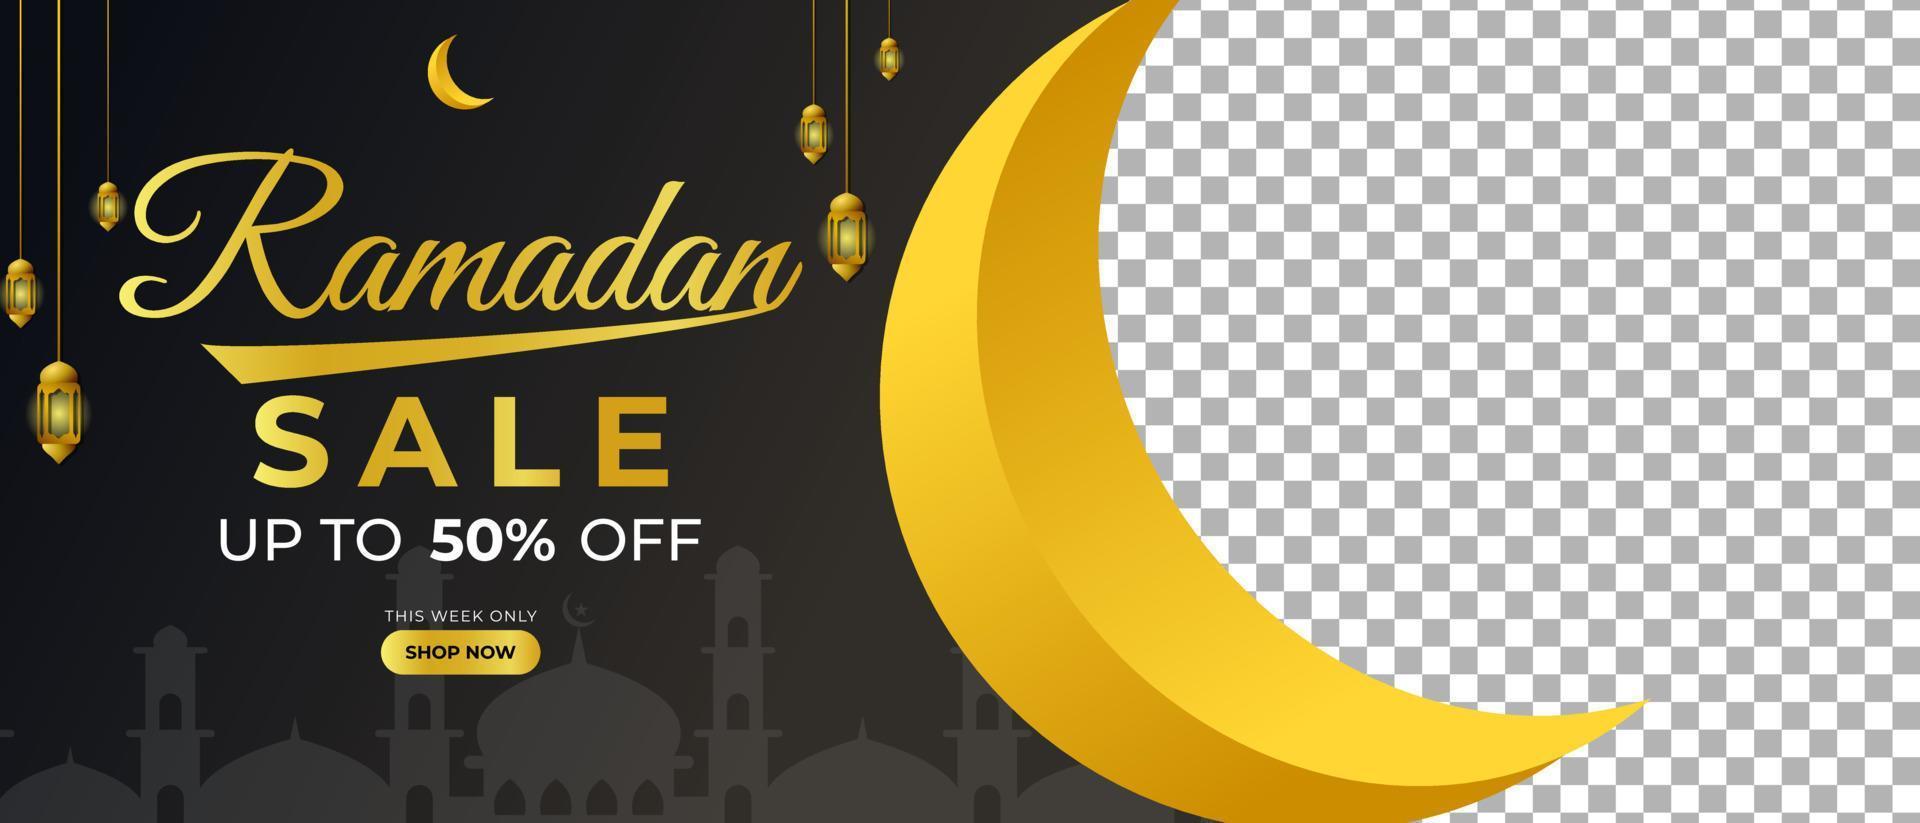 Ramadan sale discount banner template promotion design for business vector